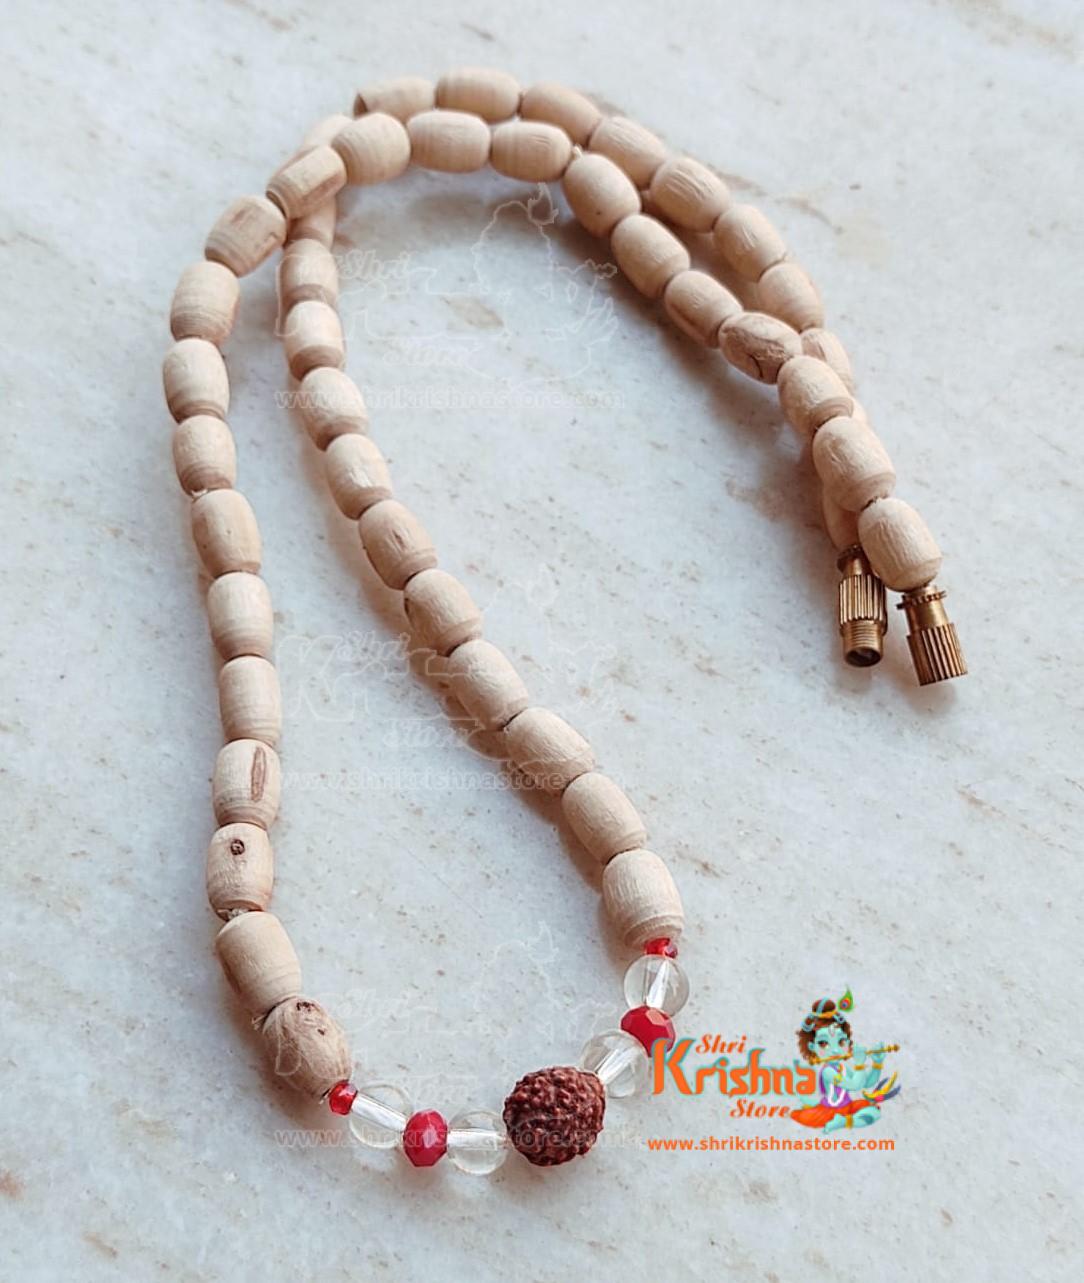 Fancy dull cream color wooden beads mala with Original 5 face rudraksha bead